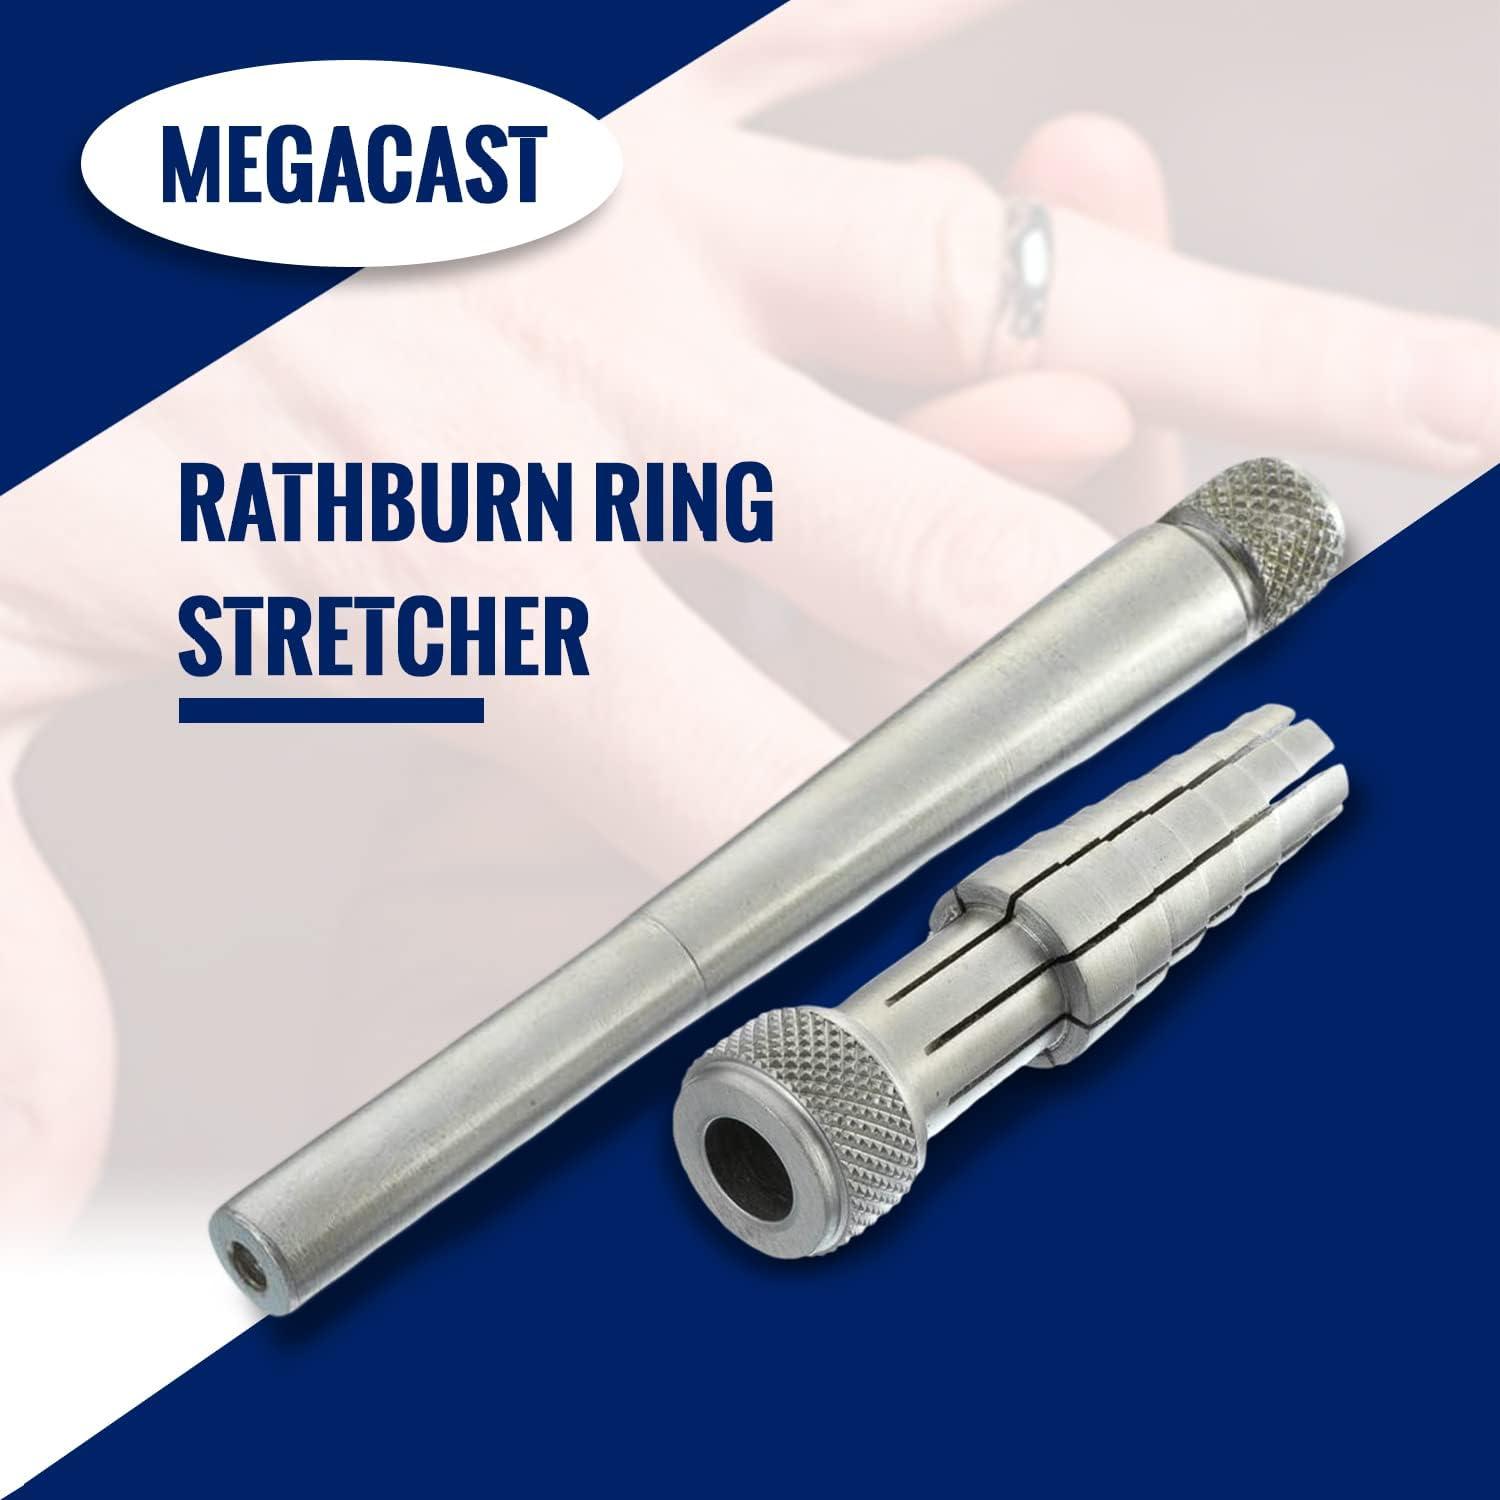 Rathburn Ring Stretcher: How To Resize A Ring